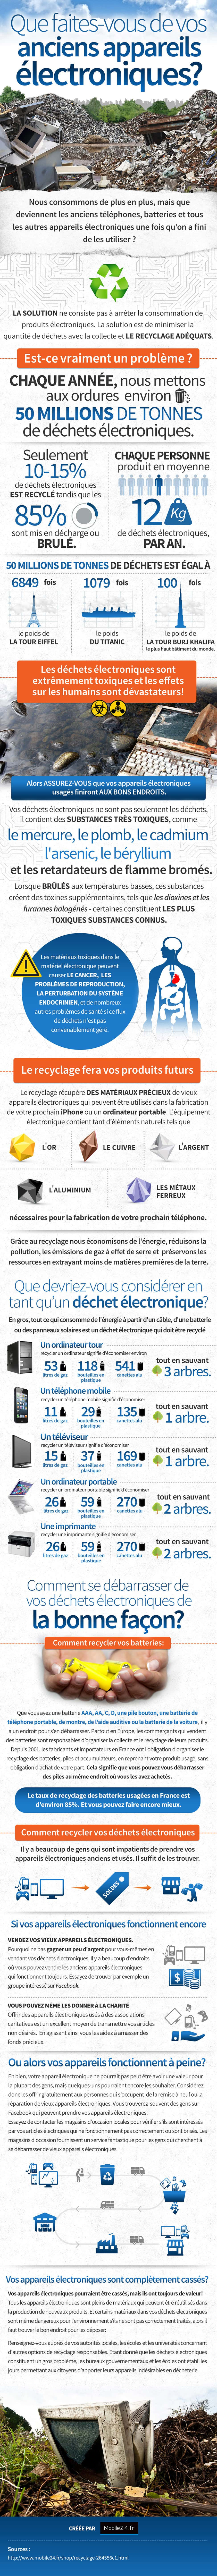 guide recyclage appareils electroniques